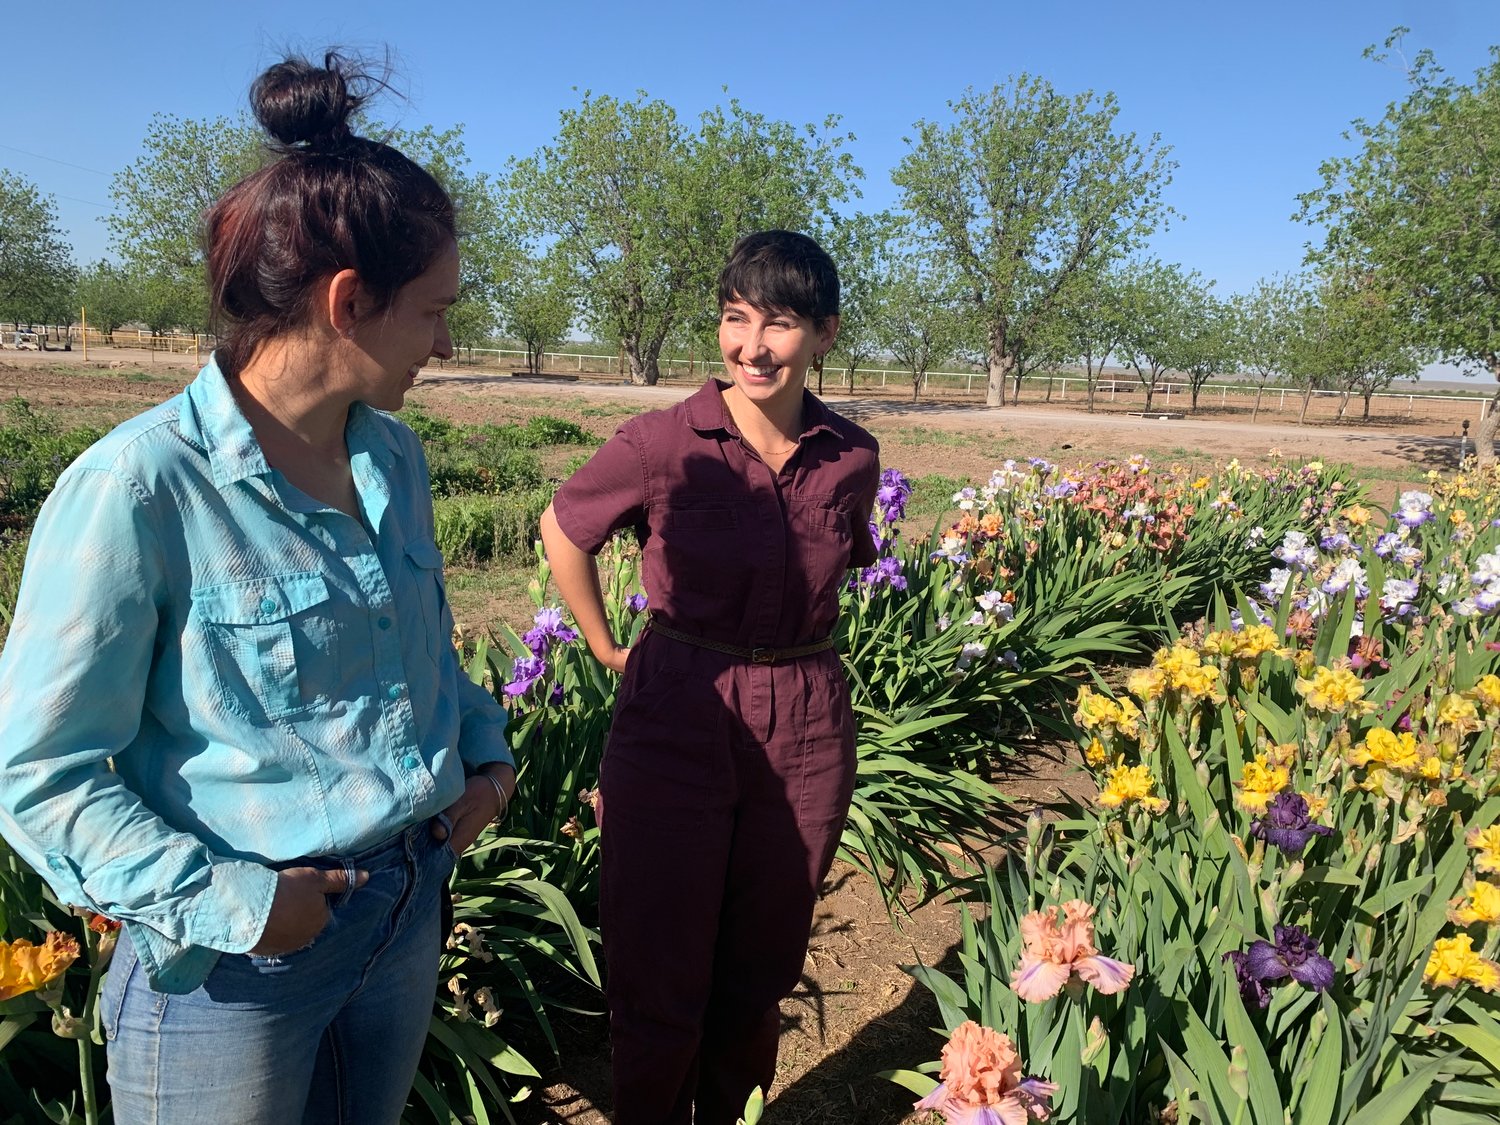 Sisters  Susannah Calhoun and Lillian Calhoun manage Calhoun Flower Farms in Anthony, New Mexico. Hands-on work means everything from harvesting snapdragons to delivering bouquets. Here they chat in the iris garden.